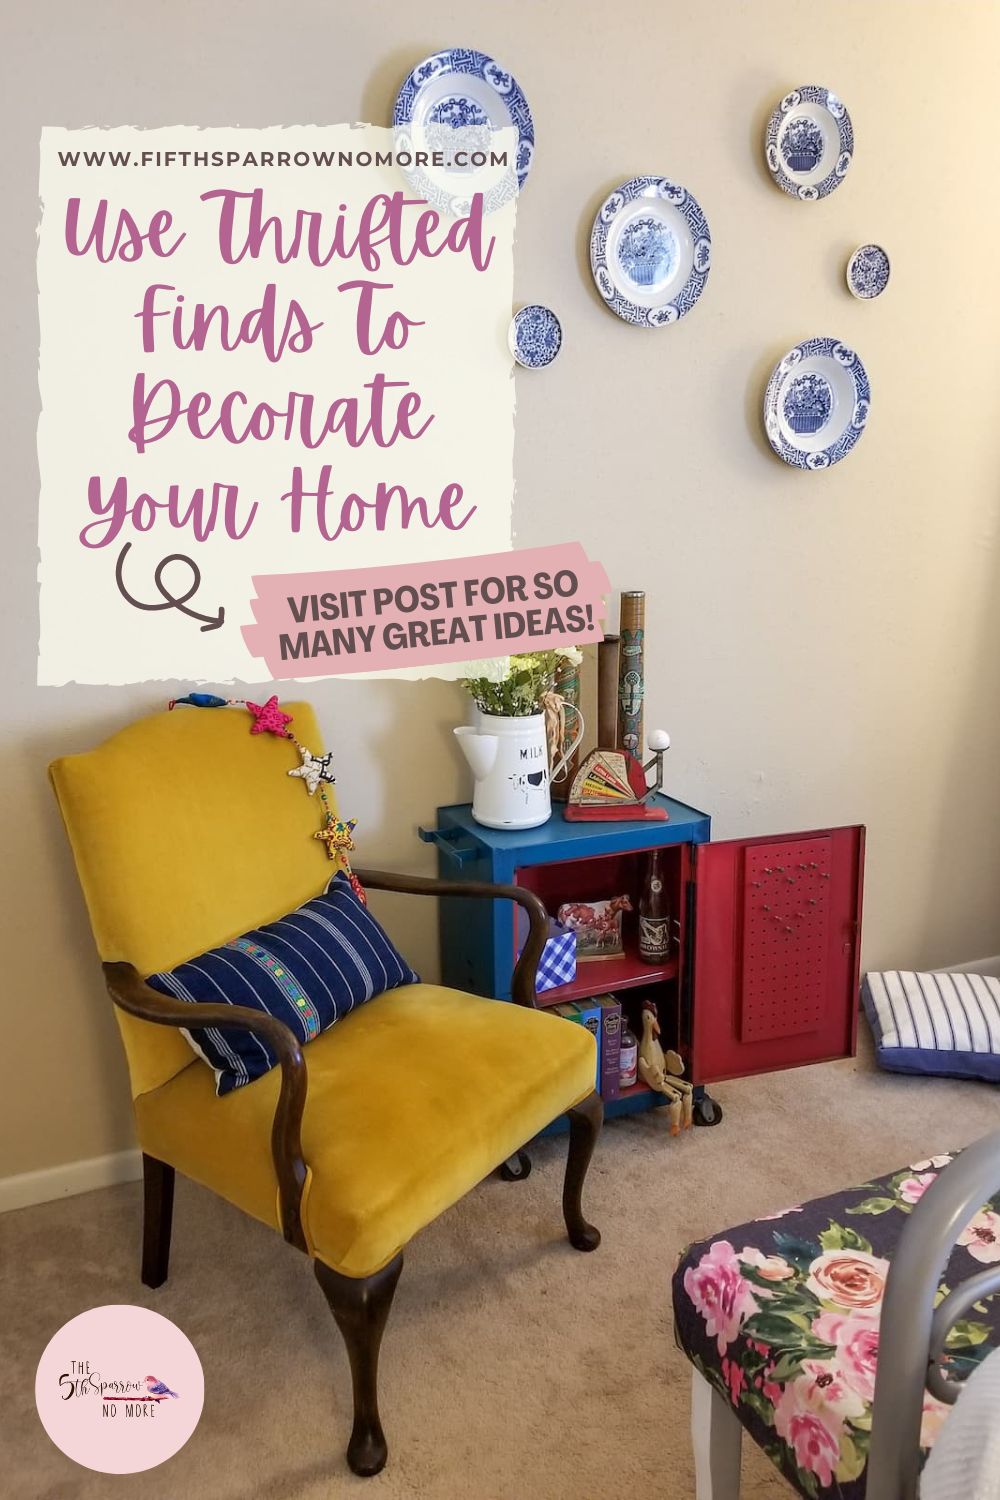 In the post let’s walk through DIY projects, decor pieces, and furniture ideas and how to use thrifted finds when decorating your home.